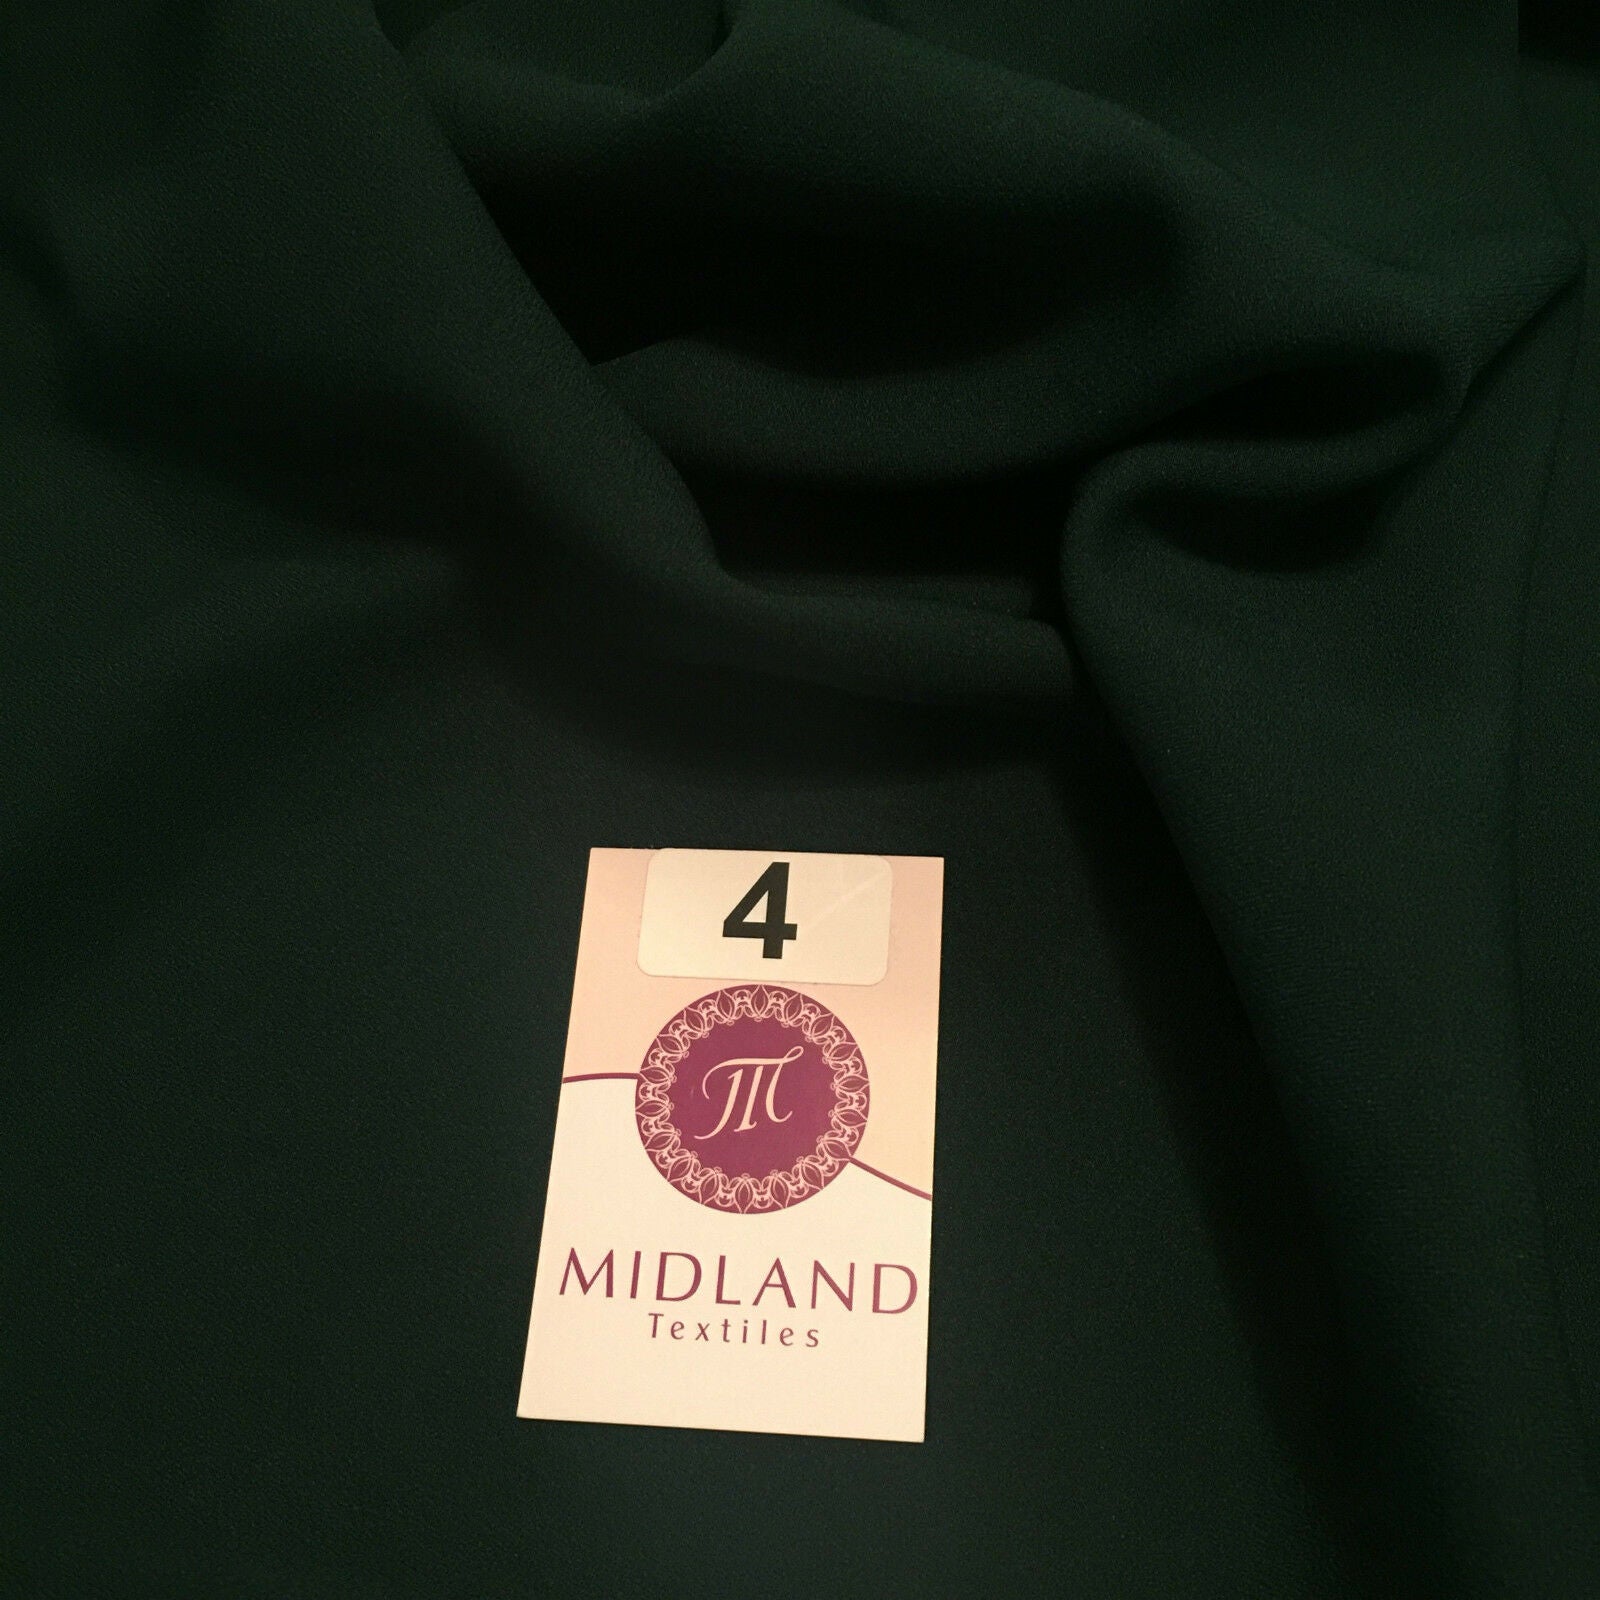 Moss Crepe tight twist woven fabric ideal for suits, shirts & jackets M460 Mtex